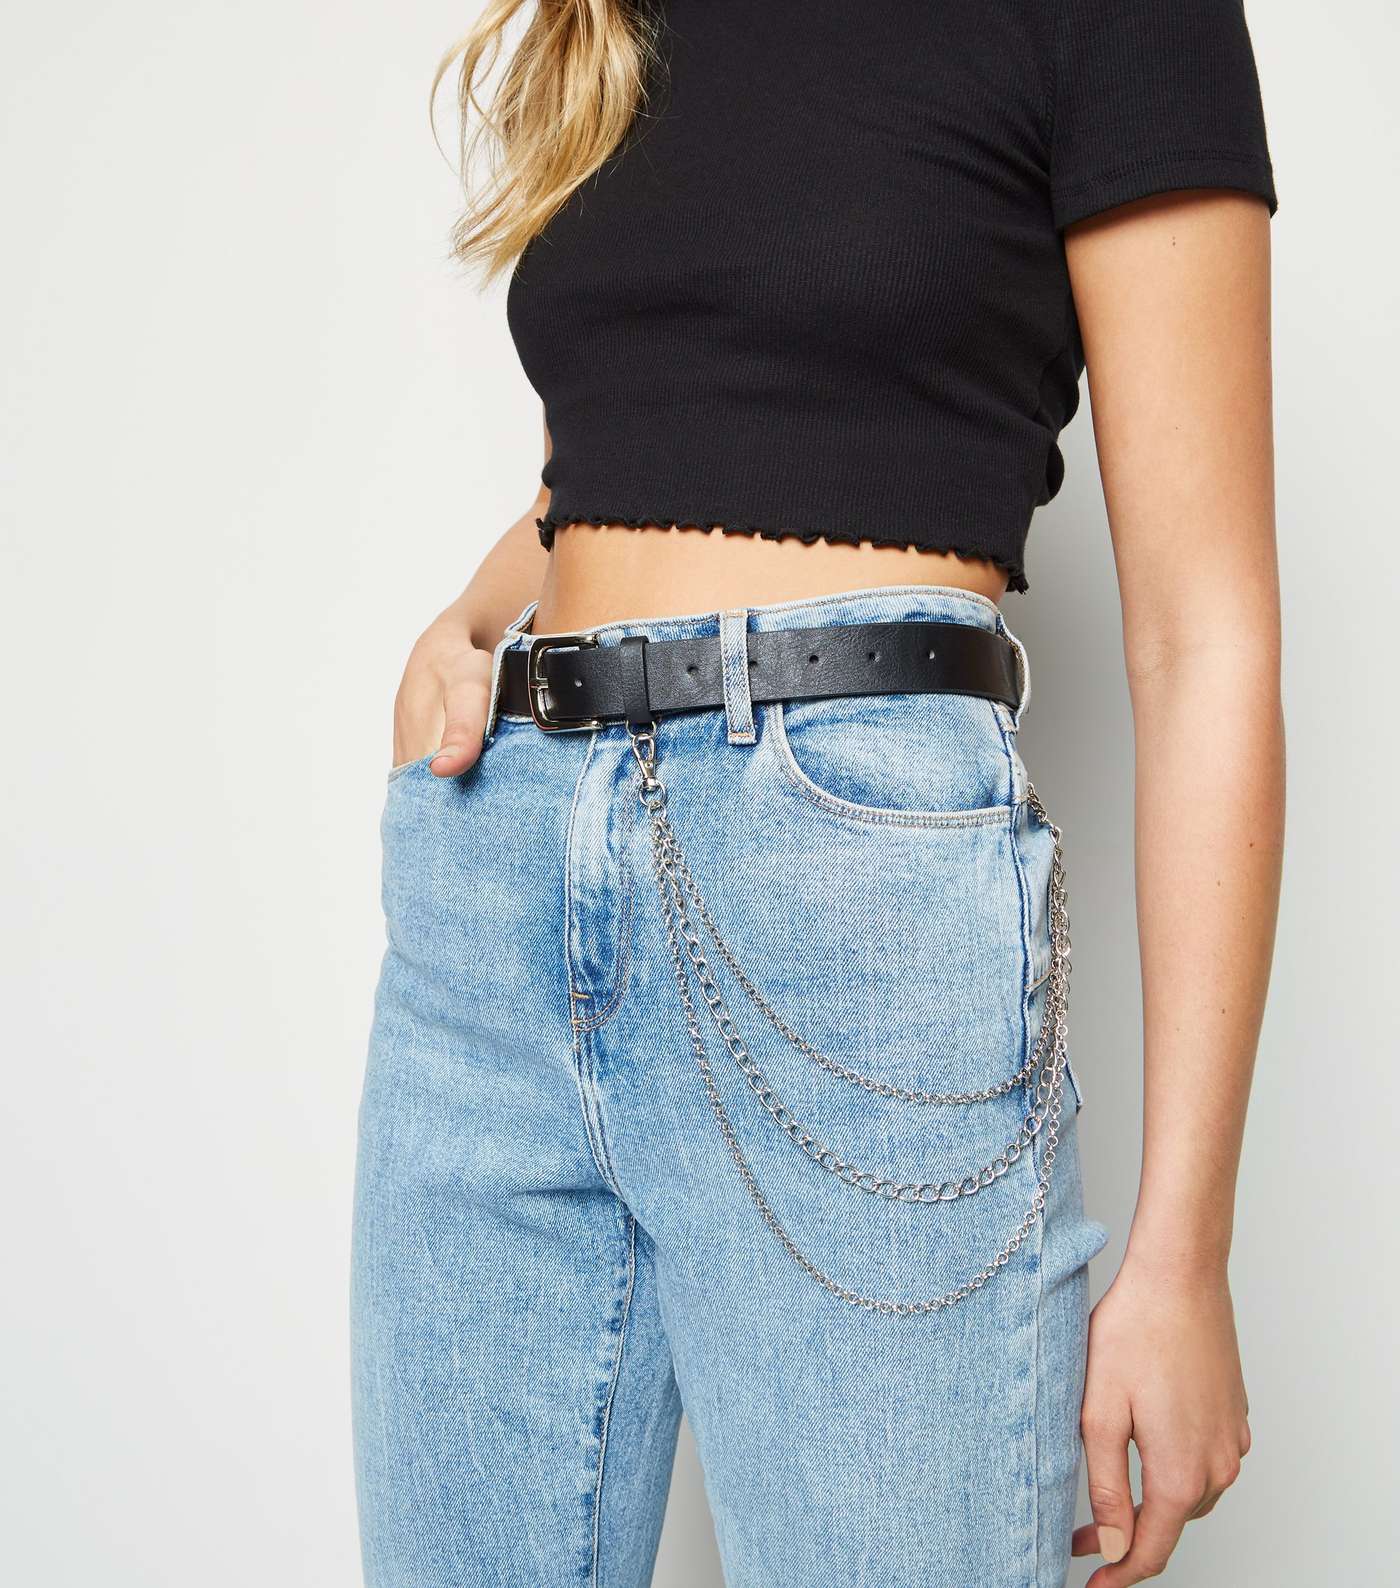 Black Leather-Look Chain Jeans Belt